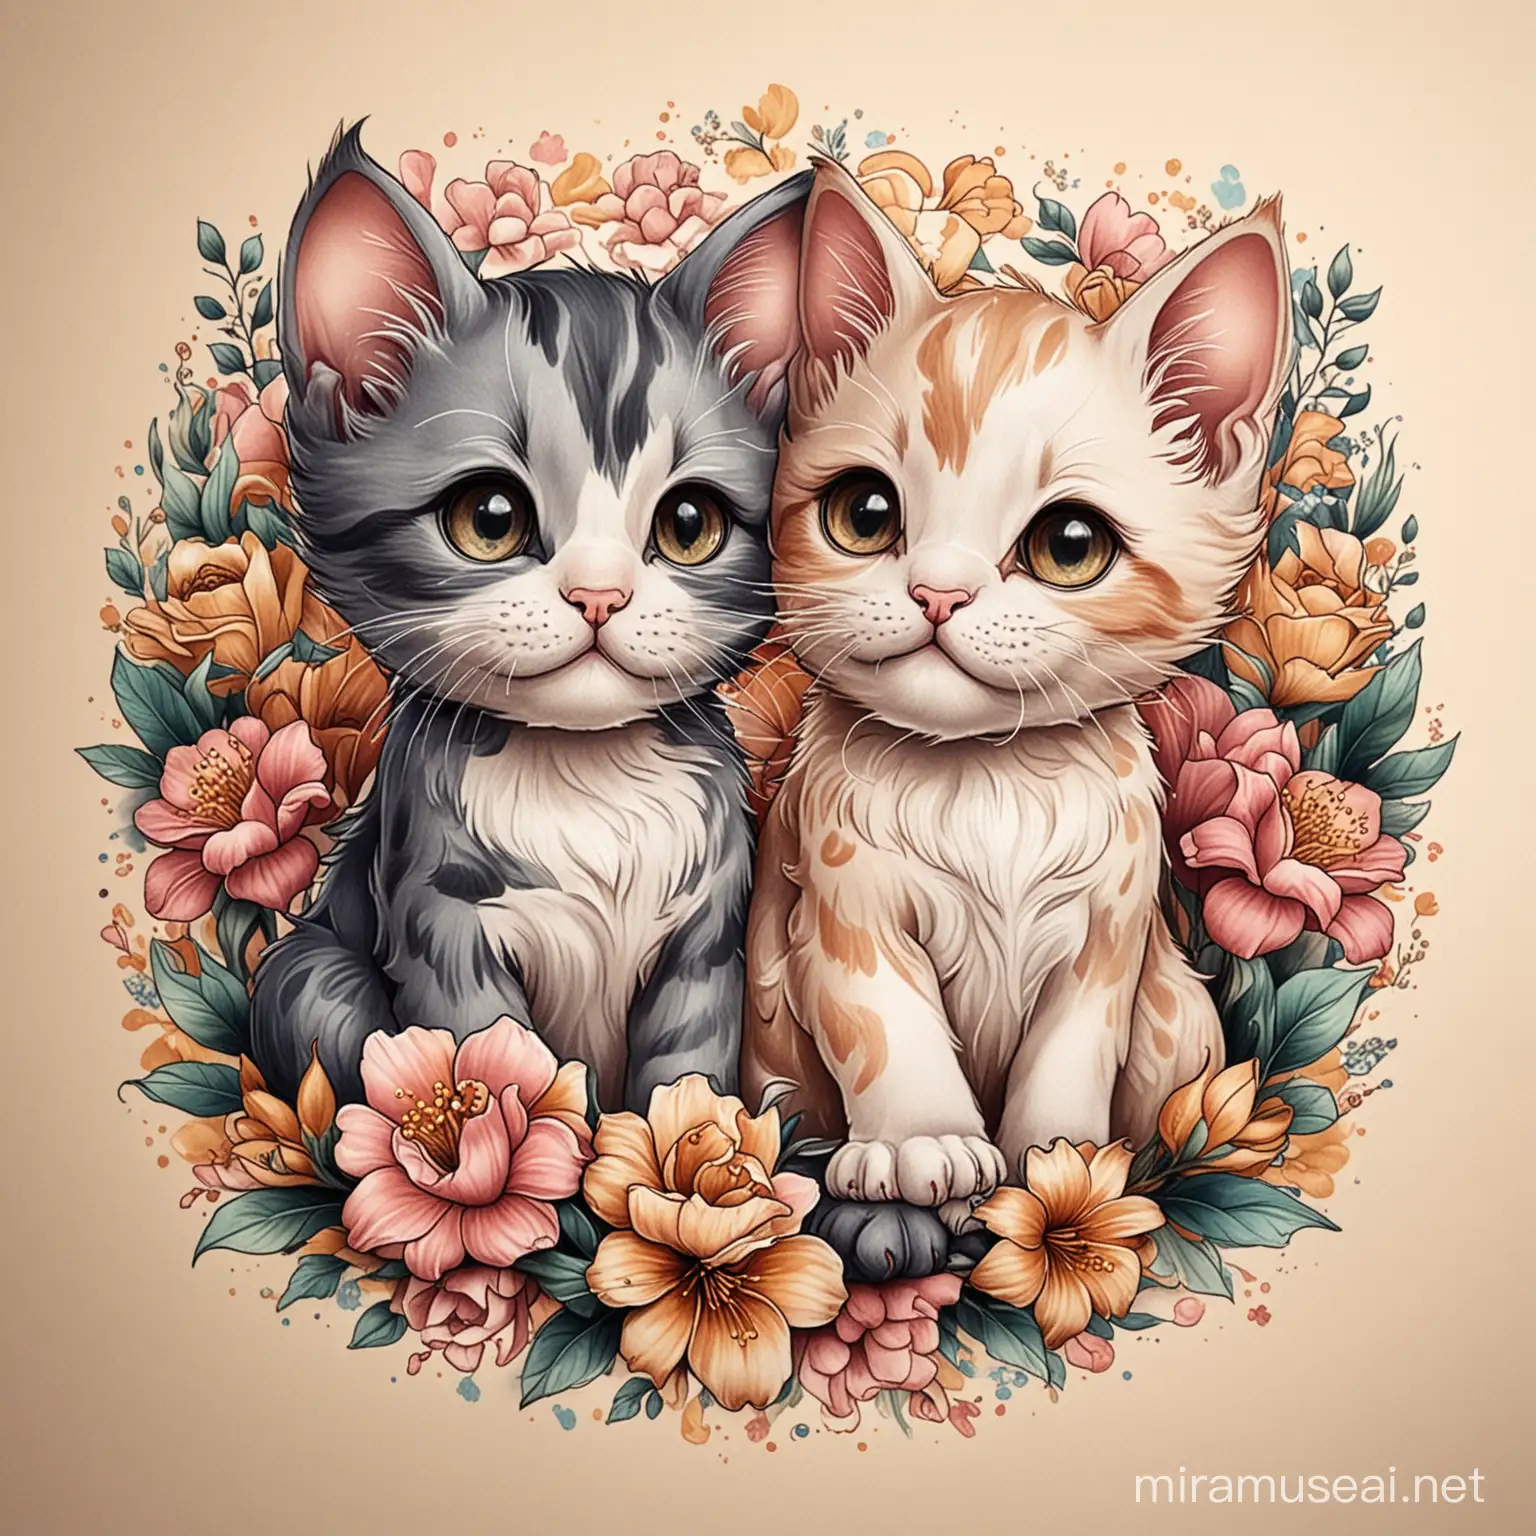 For a tattoo project on neotraditional style  create an image of two kittens playing each other with flowers using soft colors